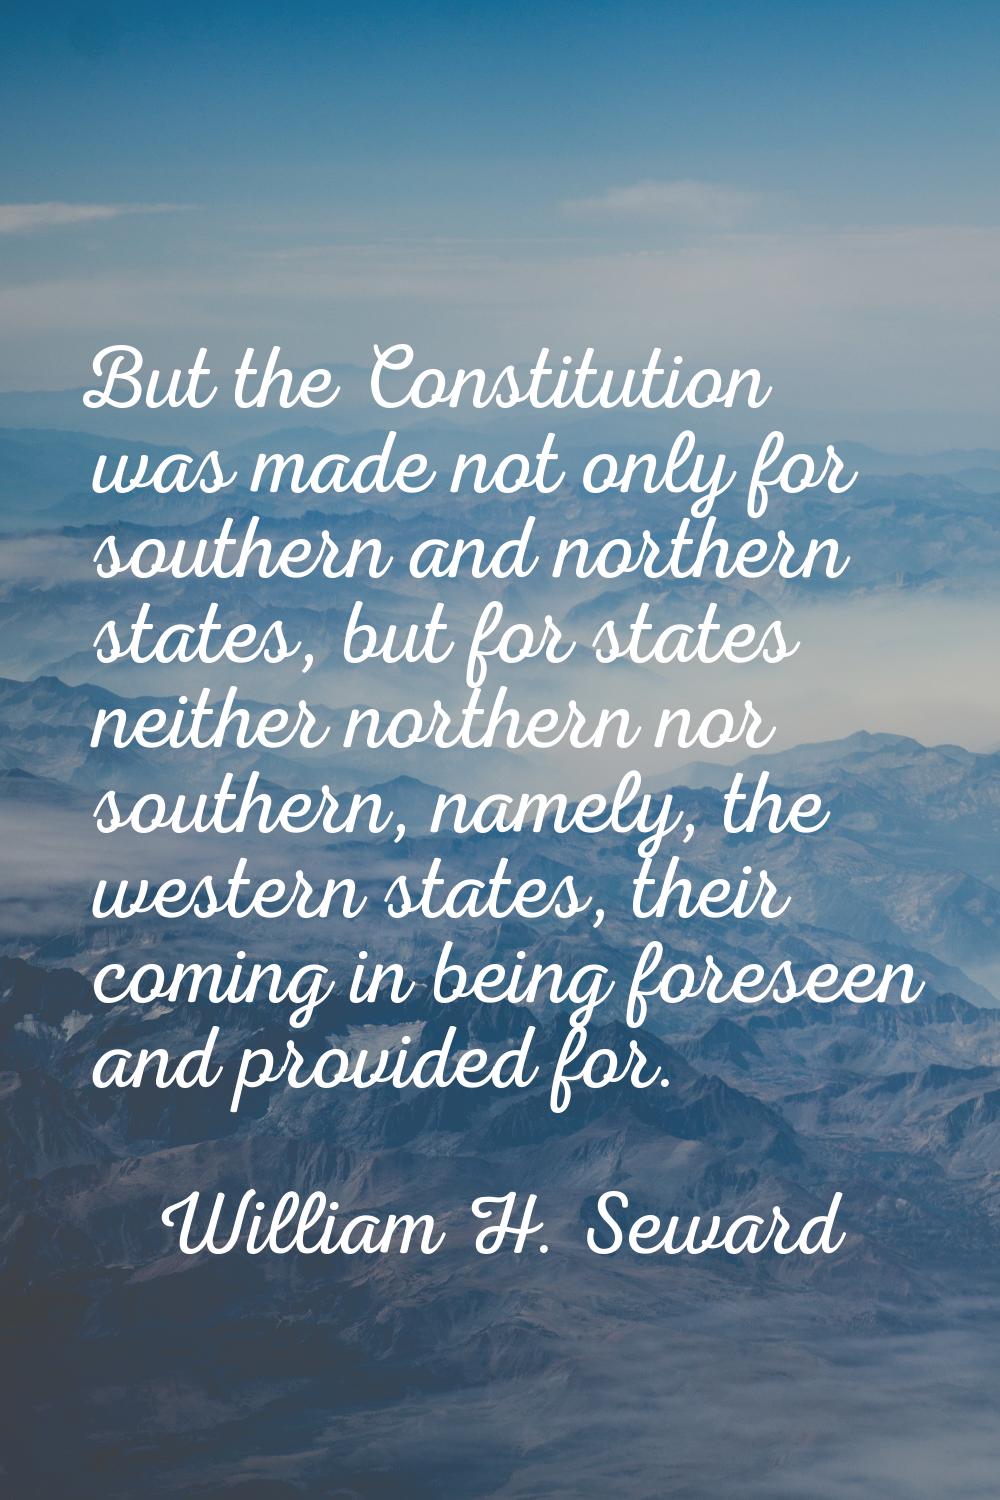 But the Constitution was made not only for southern and northern states, but for states neither nor